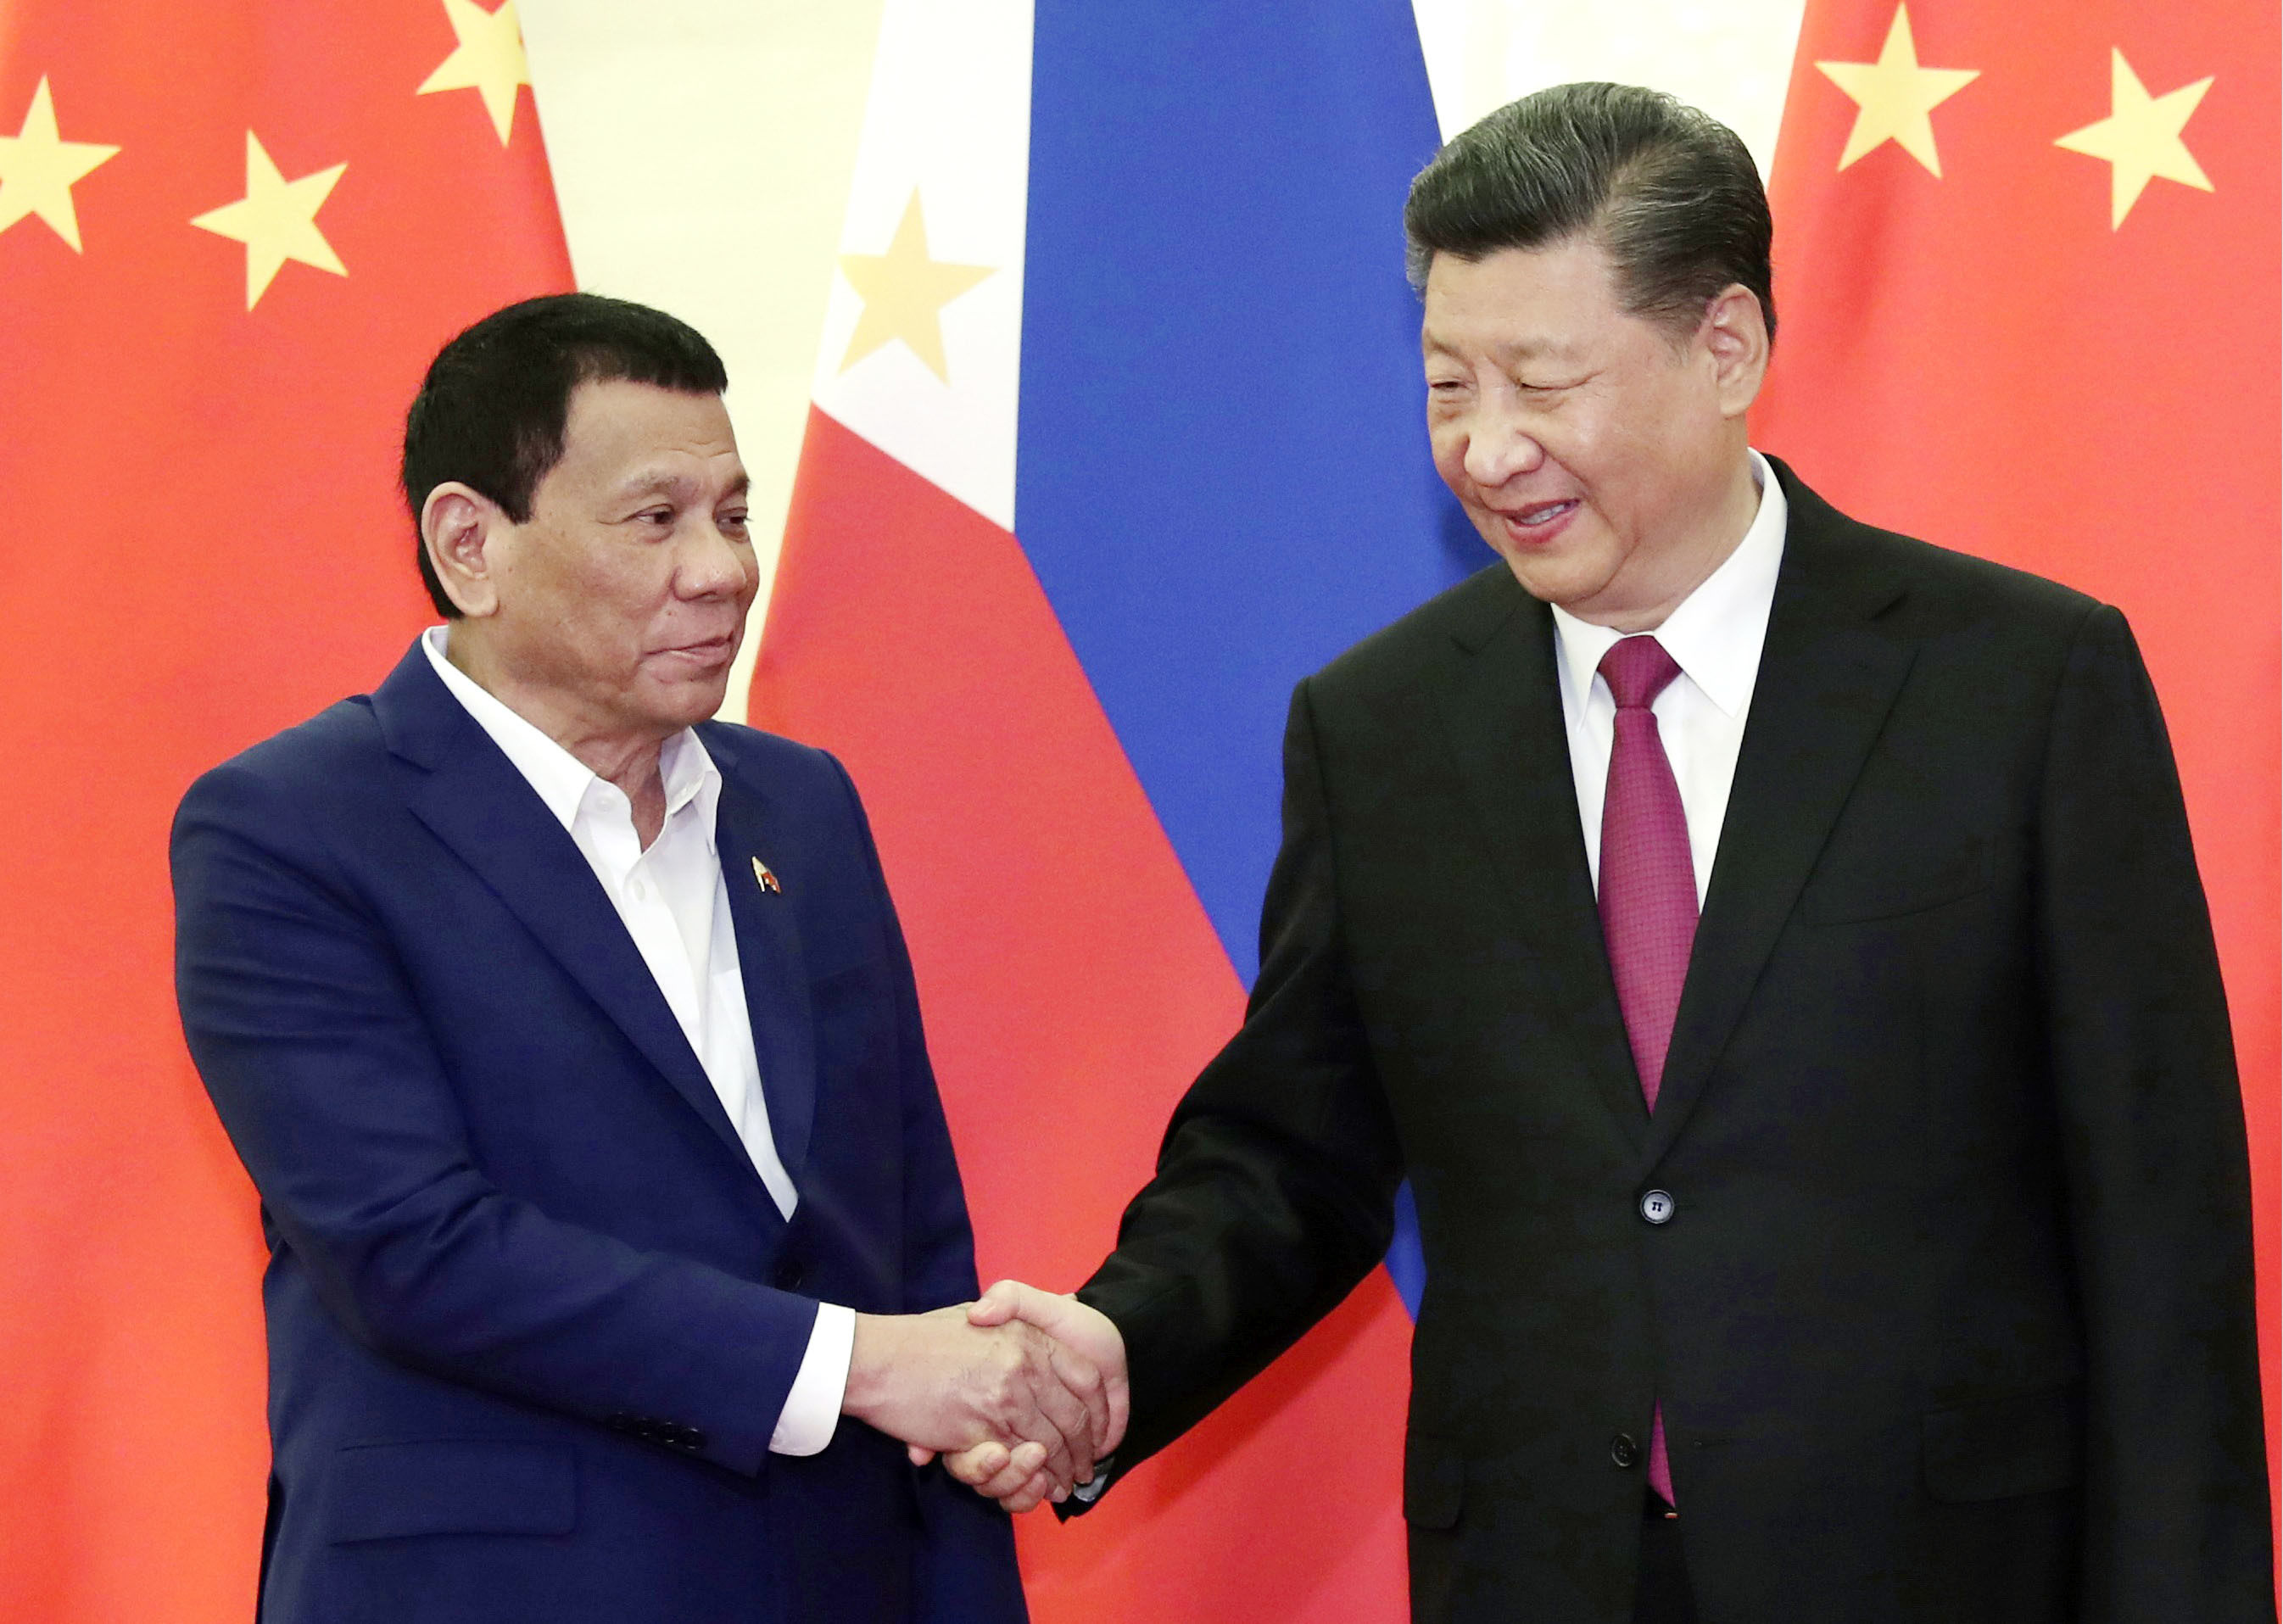 Philippine President Rodrigo Duterte shakes hands with Chinese President Xi Jinping before their talks in Beijing in April 2019. Photo: Kyodo